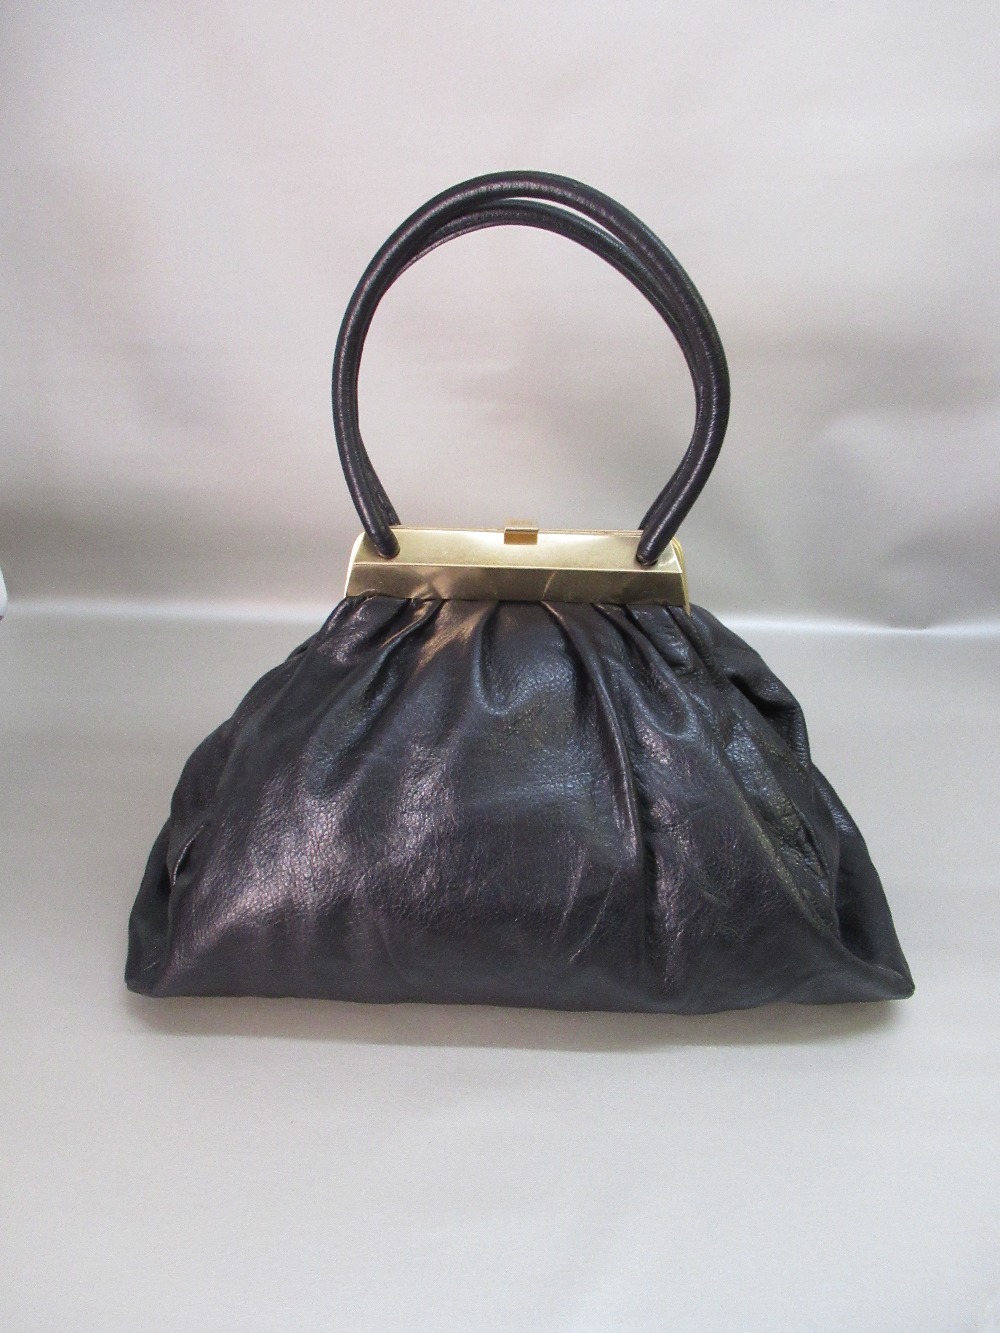 SONIA RYKIEL BLACK LEATHER HANDBAG WITH GILT METAL SNAP CLASP AND TWO LEATHER HANDLES, W: 44cm,